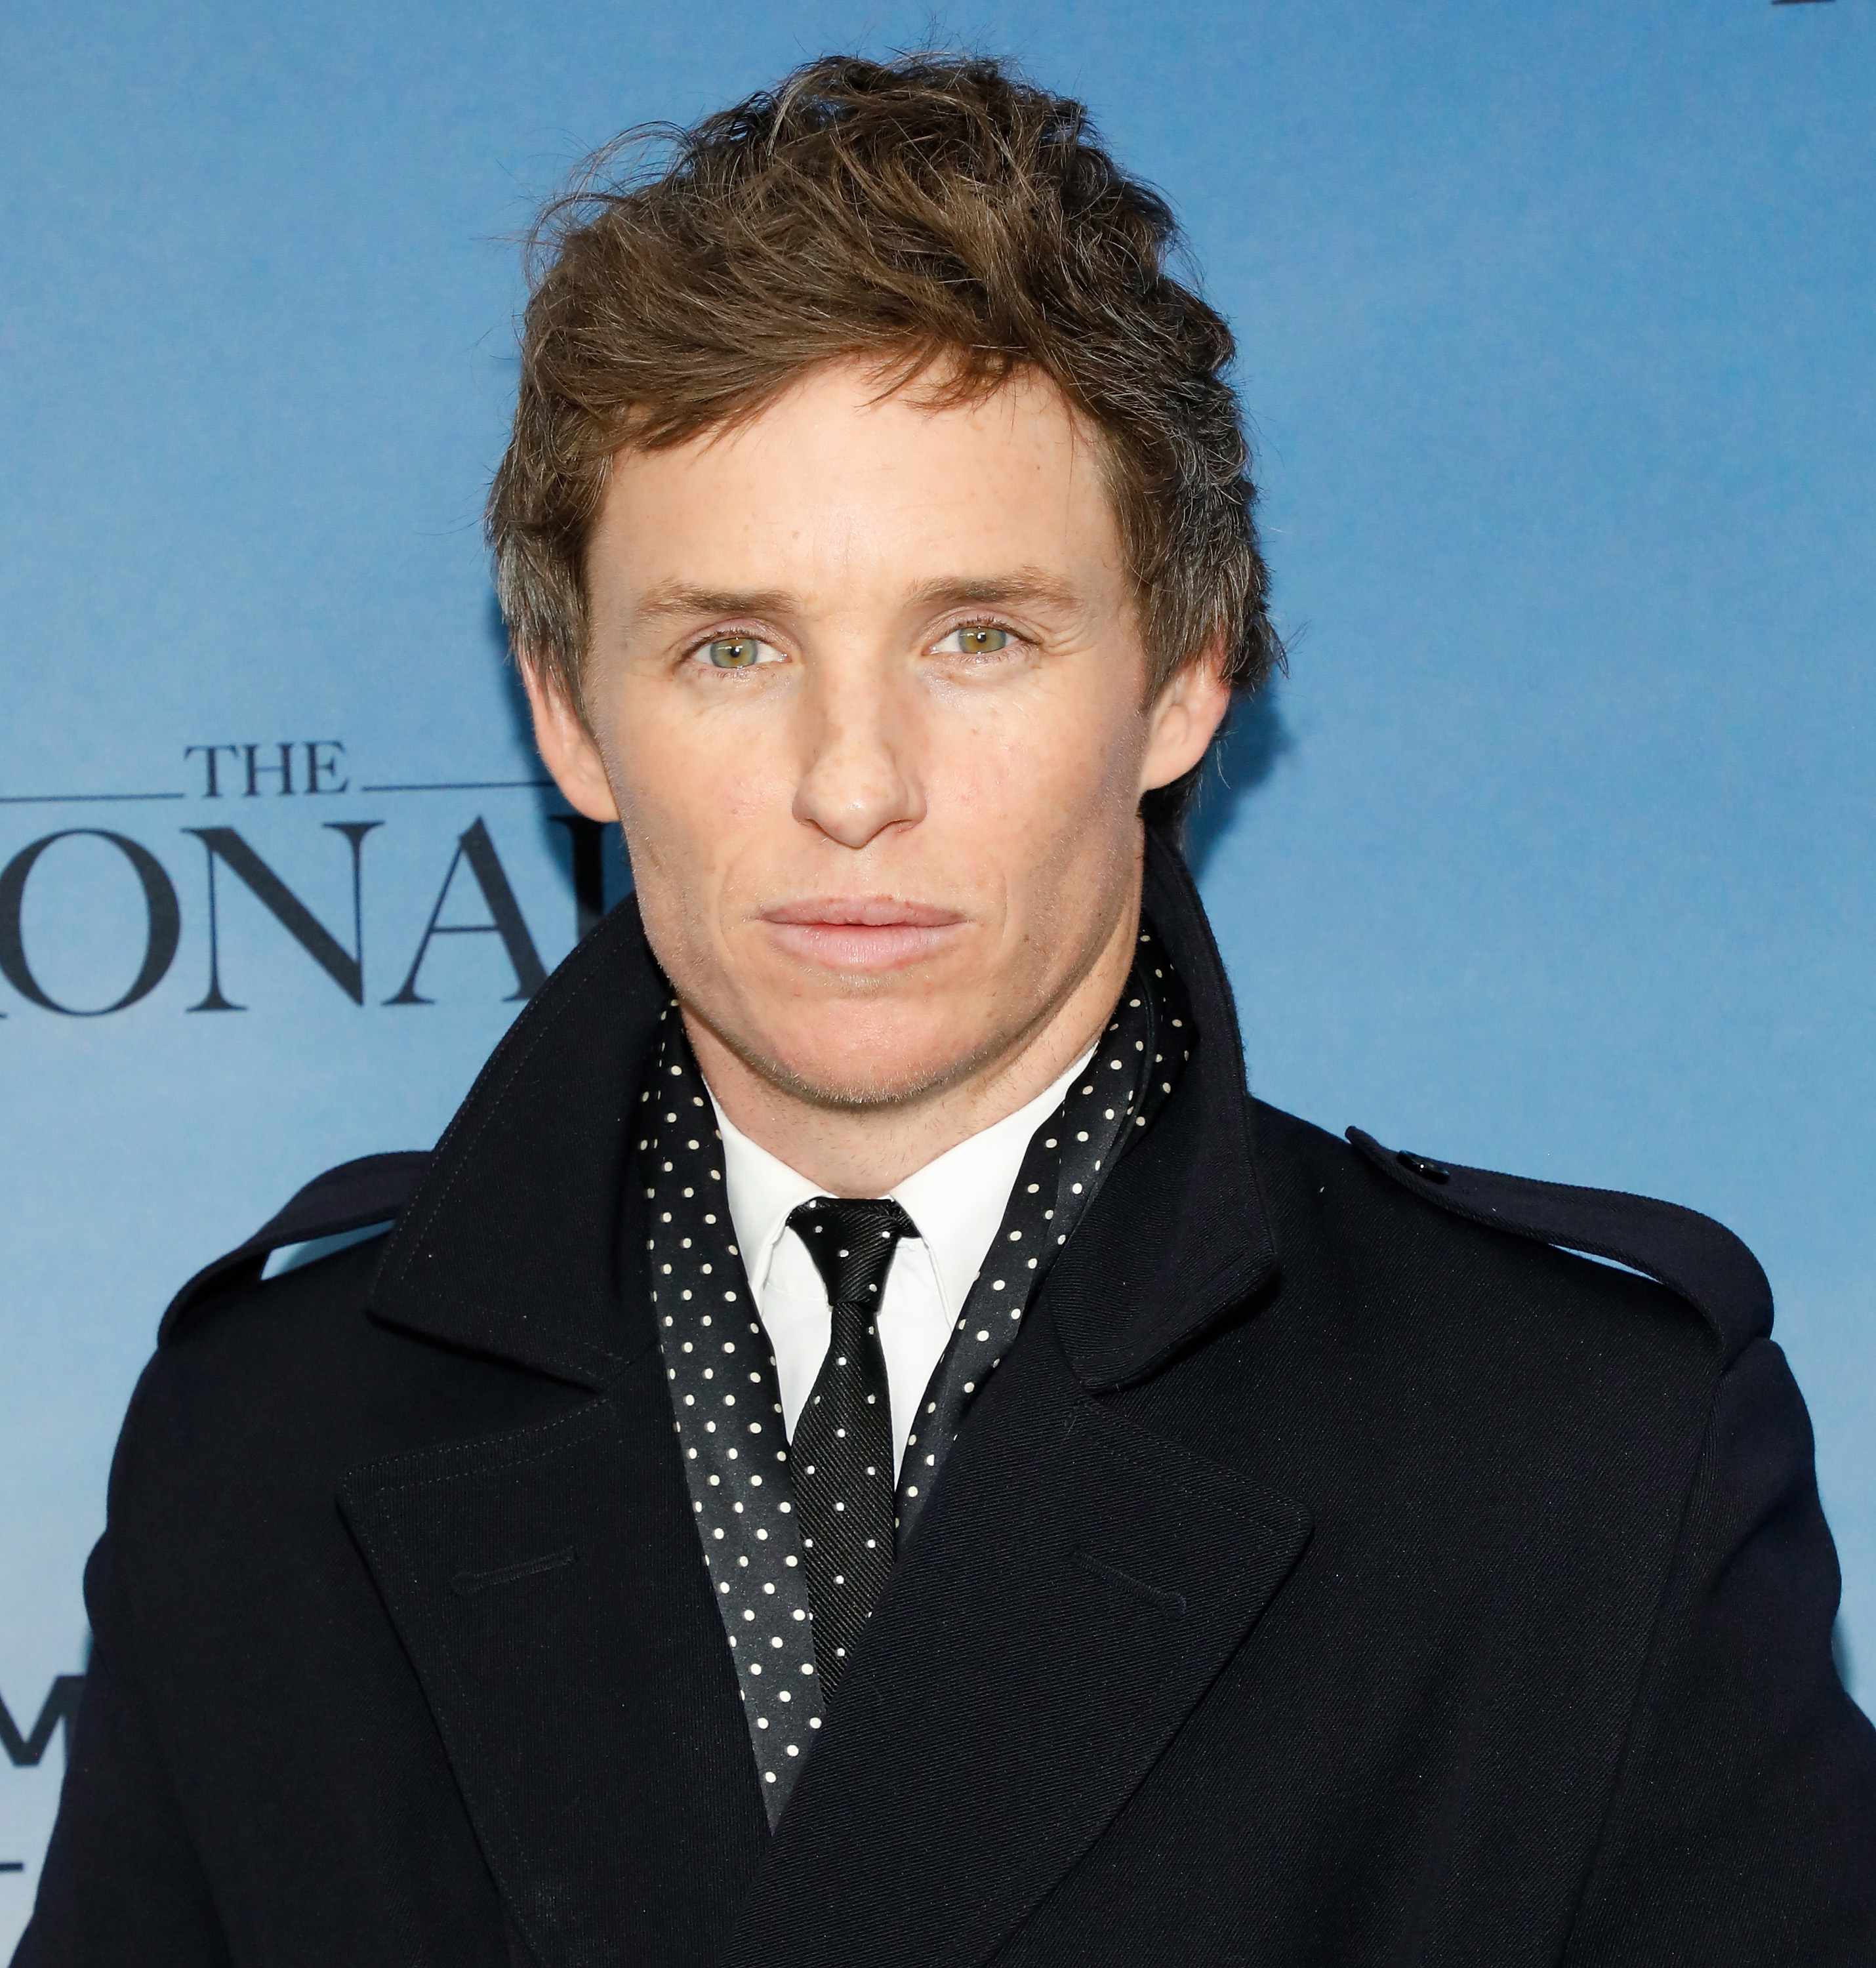 Eddie Redmayne at an event wearing a dark coat and patterned tie